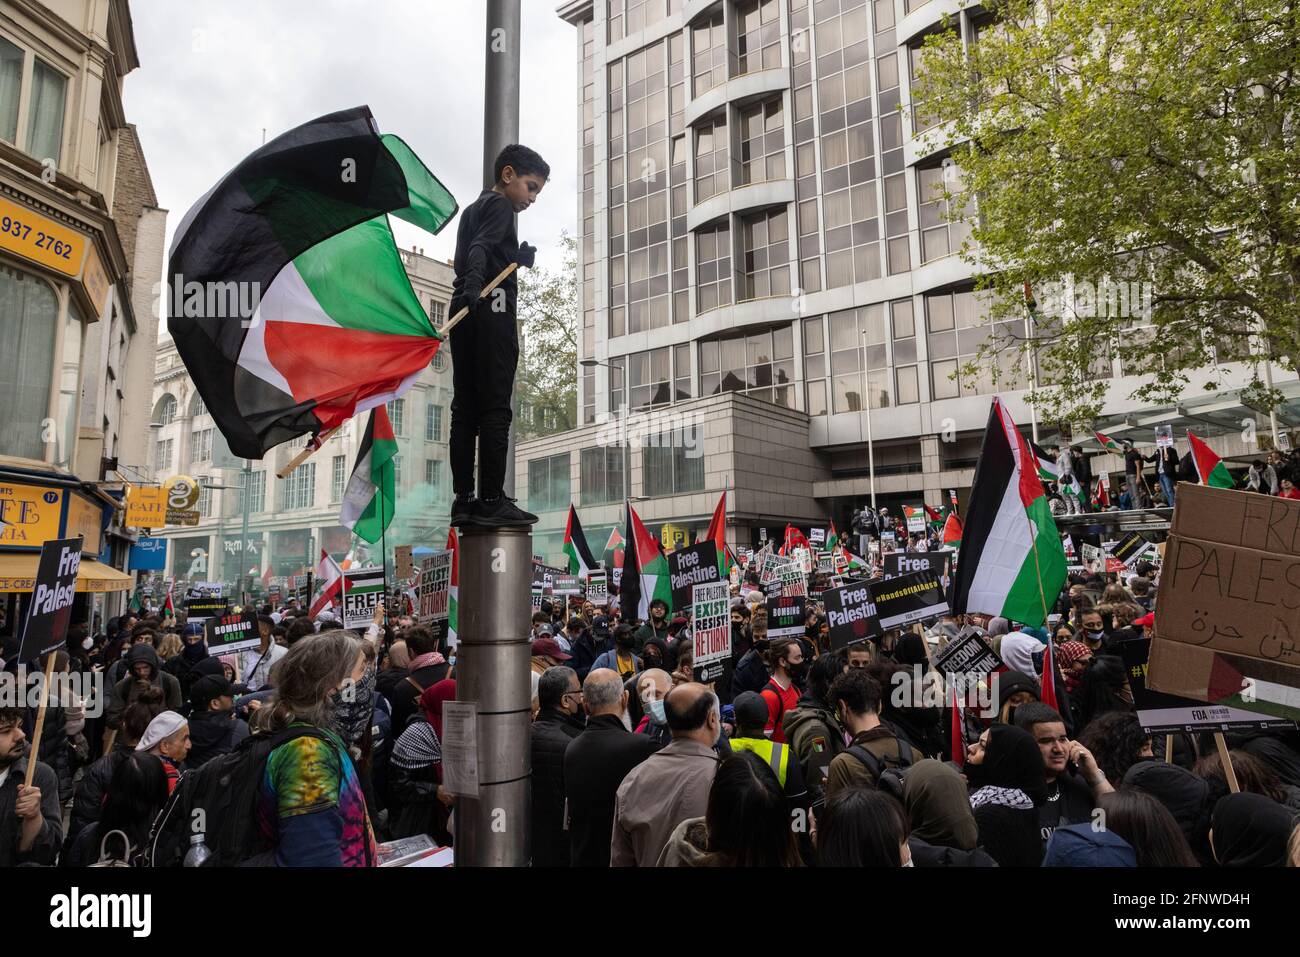 A child up a lamp post waving flag over crowd, 'Free Palestine' solidarity protest, London, 15 May 2021 Stock Photo